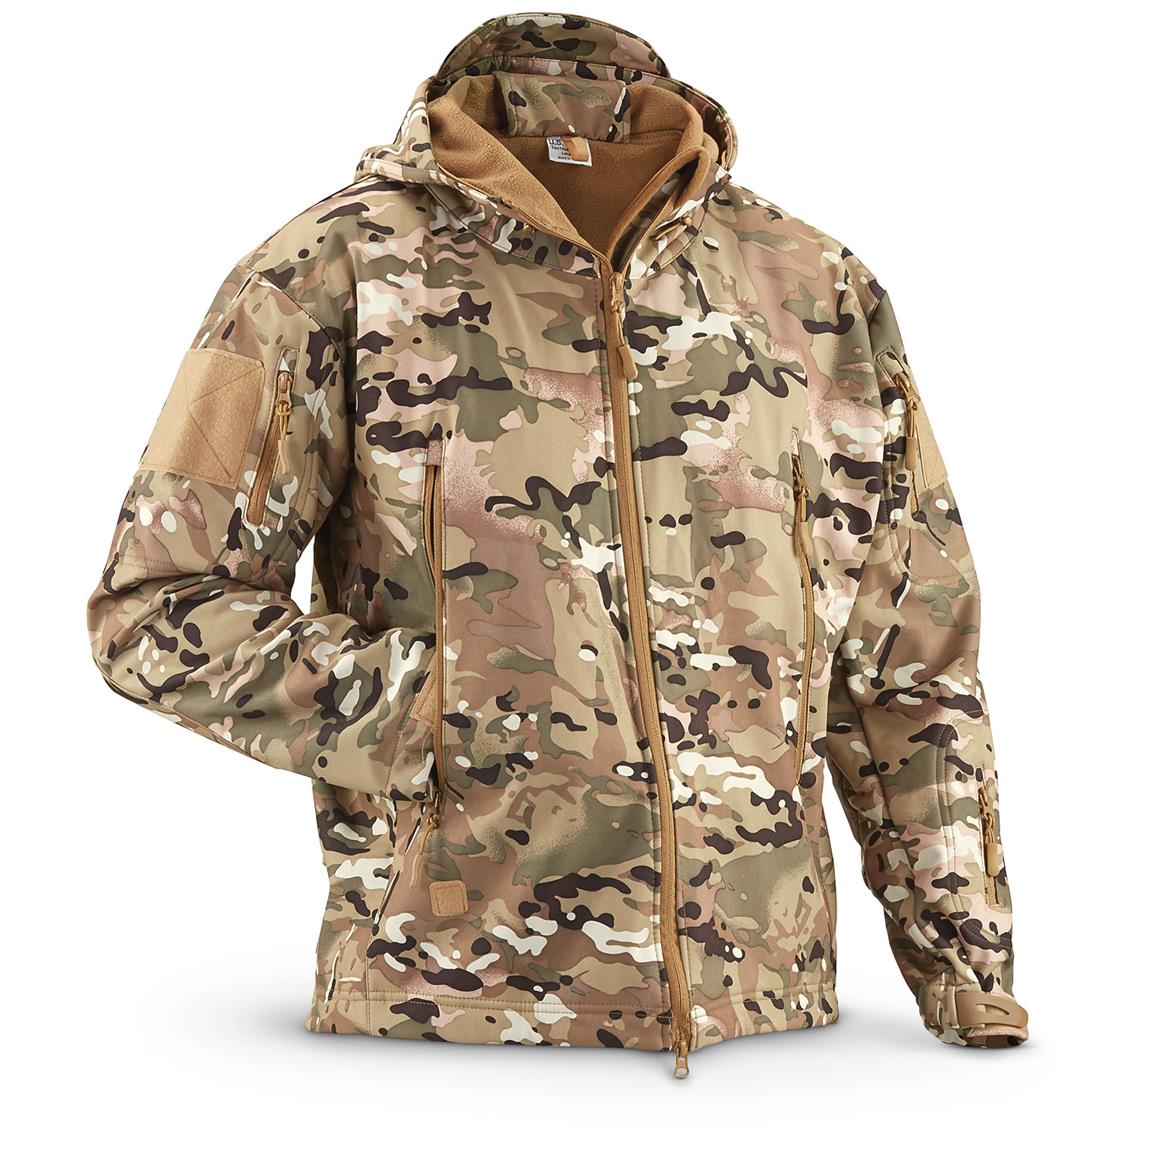 U.S. Spec Soft Shell Jacket - 627387, Tactical Clothing at Sportsman's ...